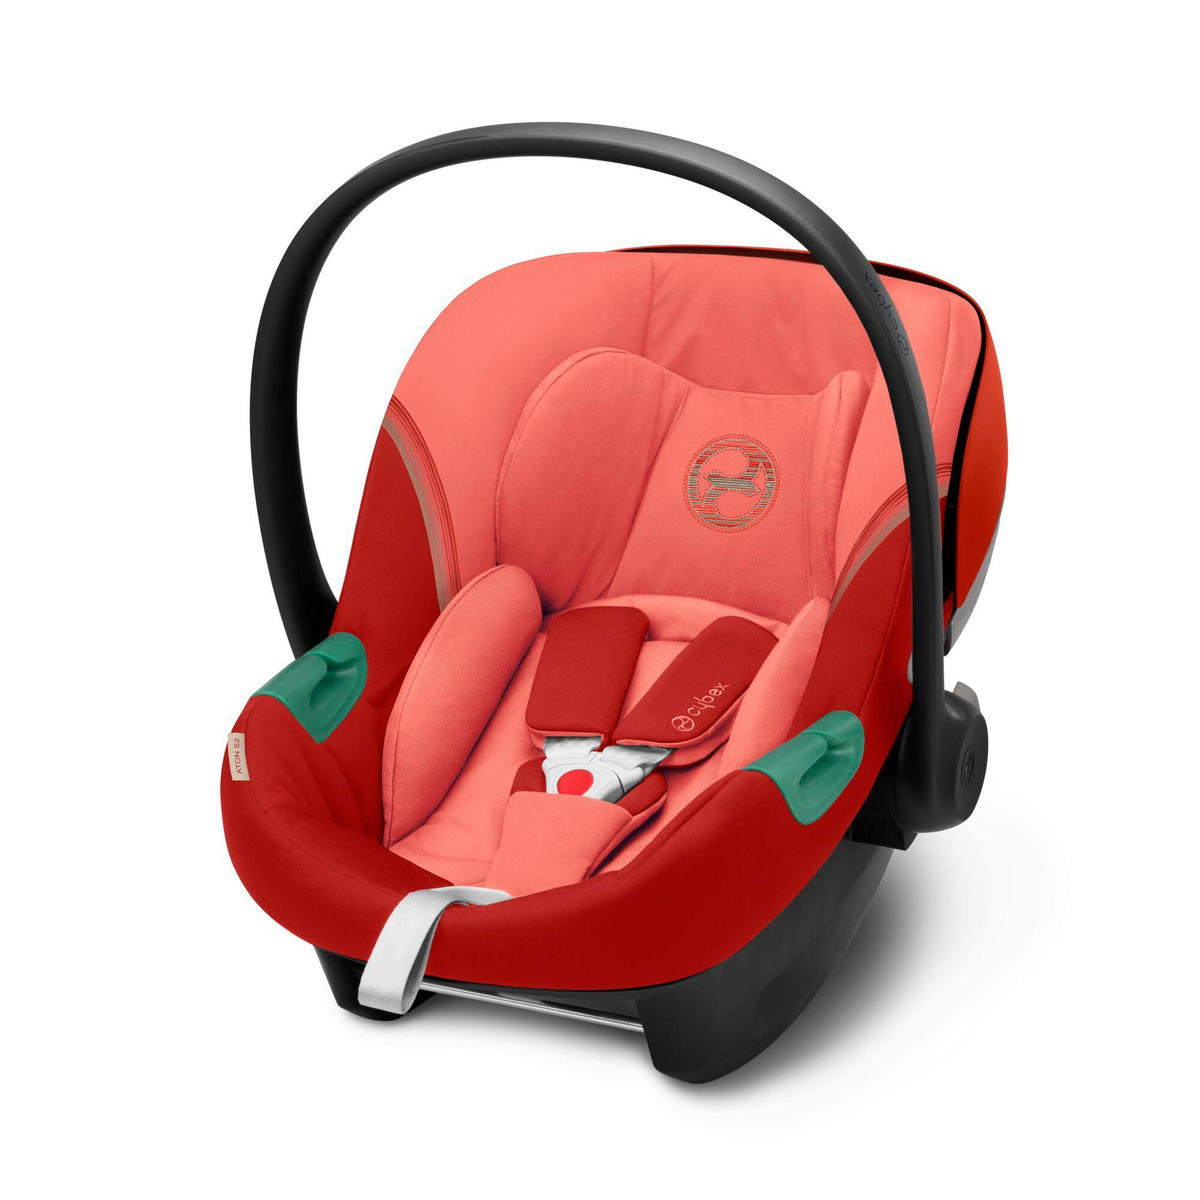 CYBEX Babyschale Aton S2 i-Size in Hibiscus Red